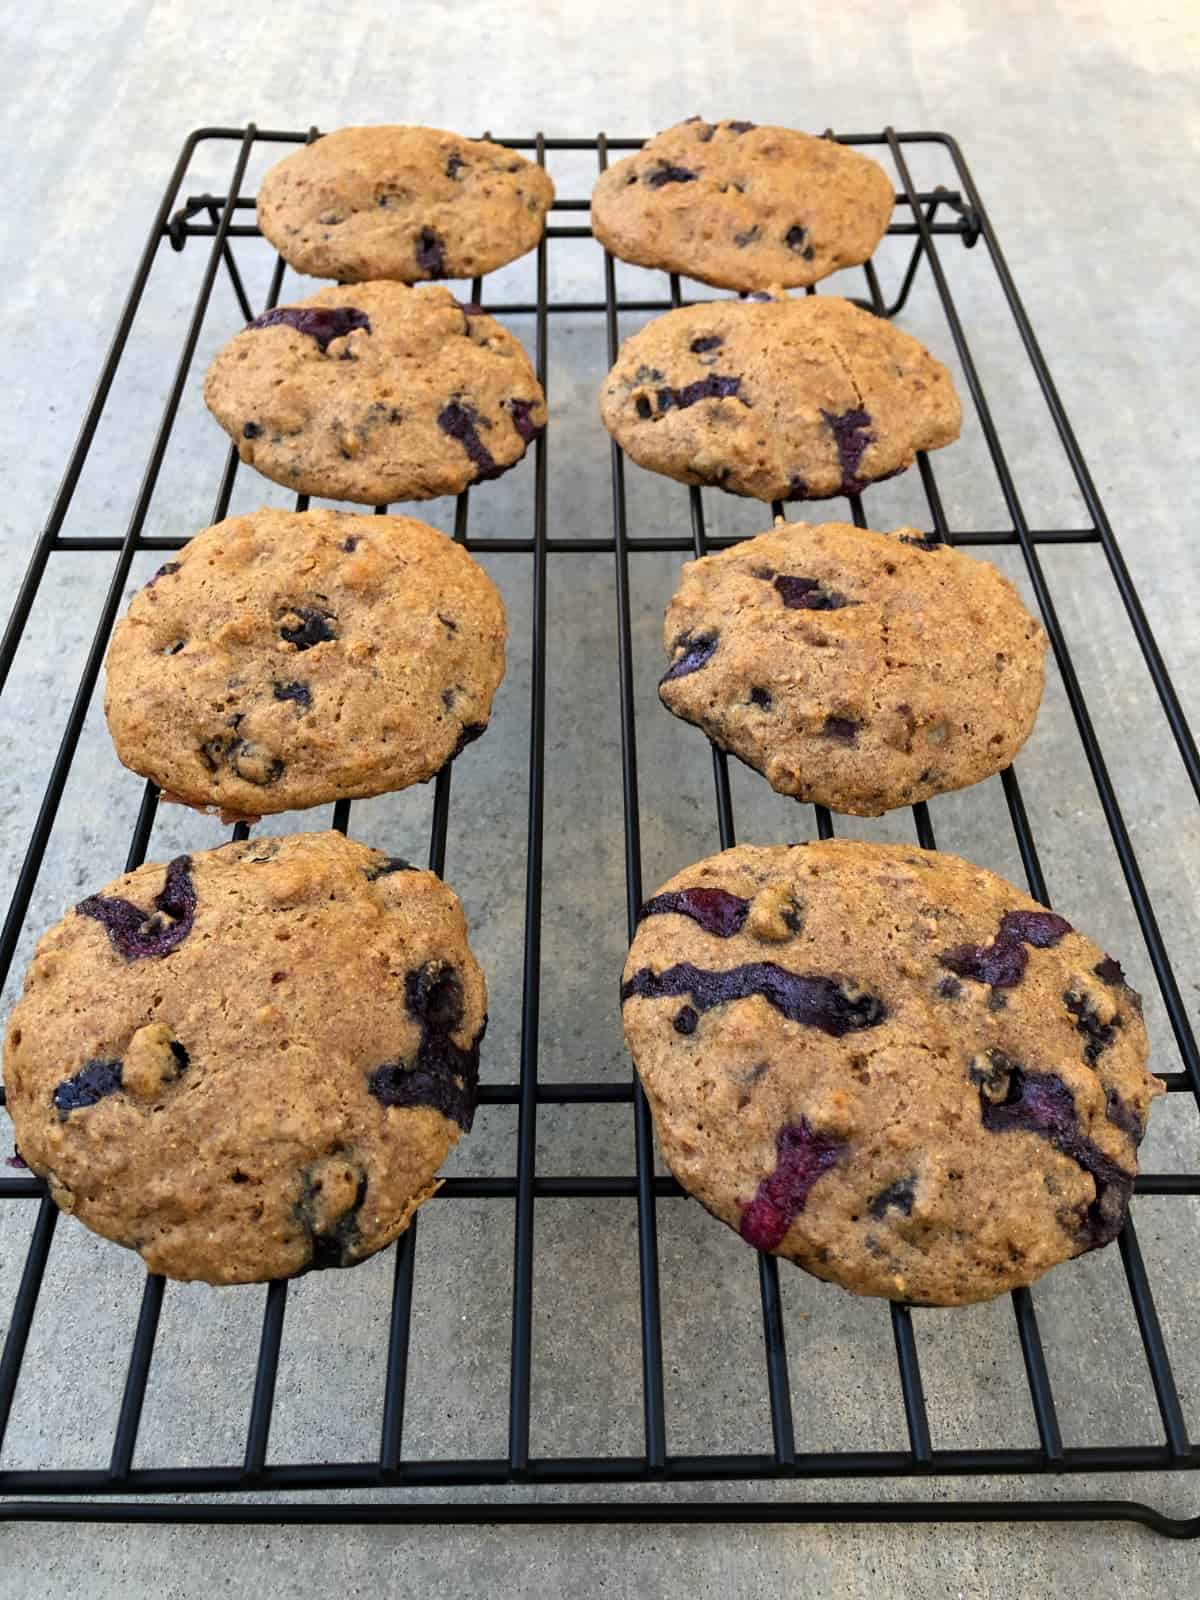 Fresh baked blueberry bran muffin tops on wire rack.